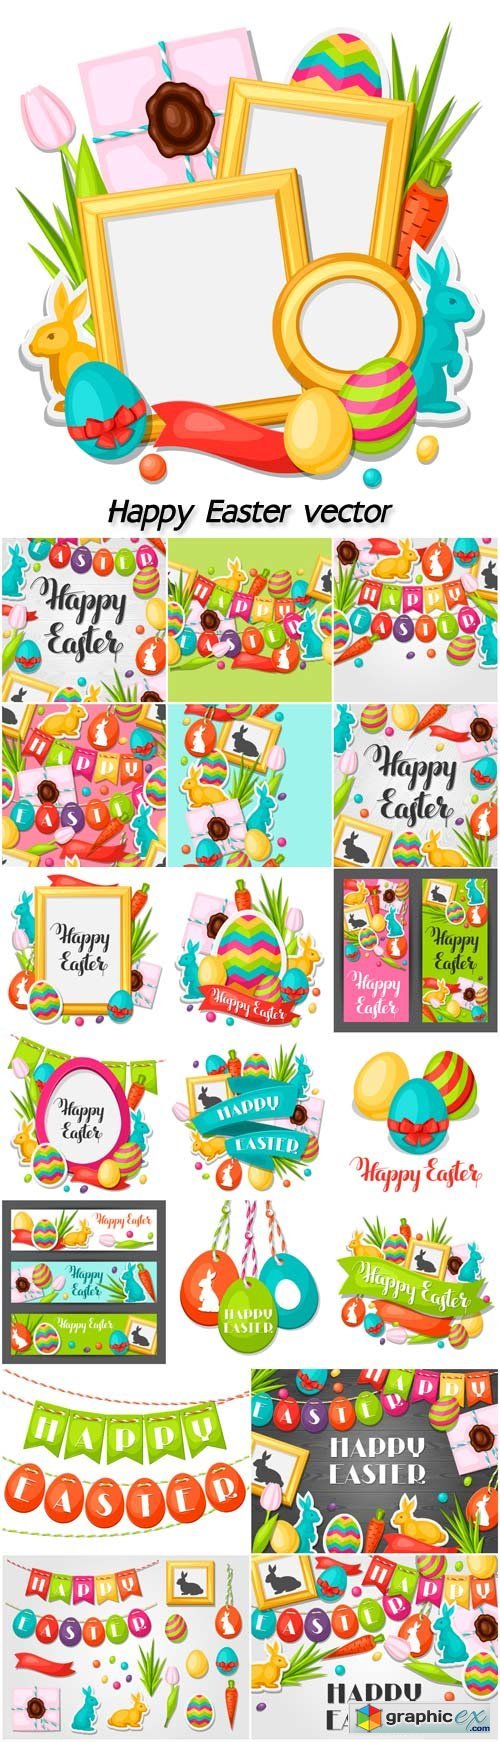 Happy Easter photo frame with decorative objects, eggs, bunnies stickers